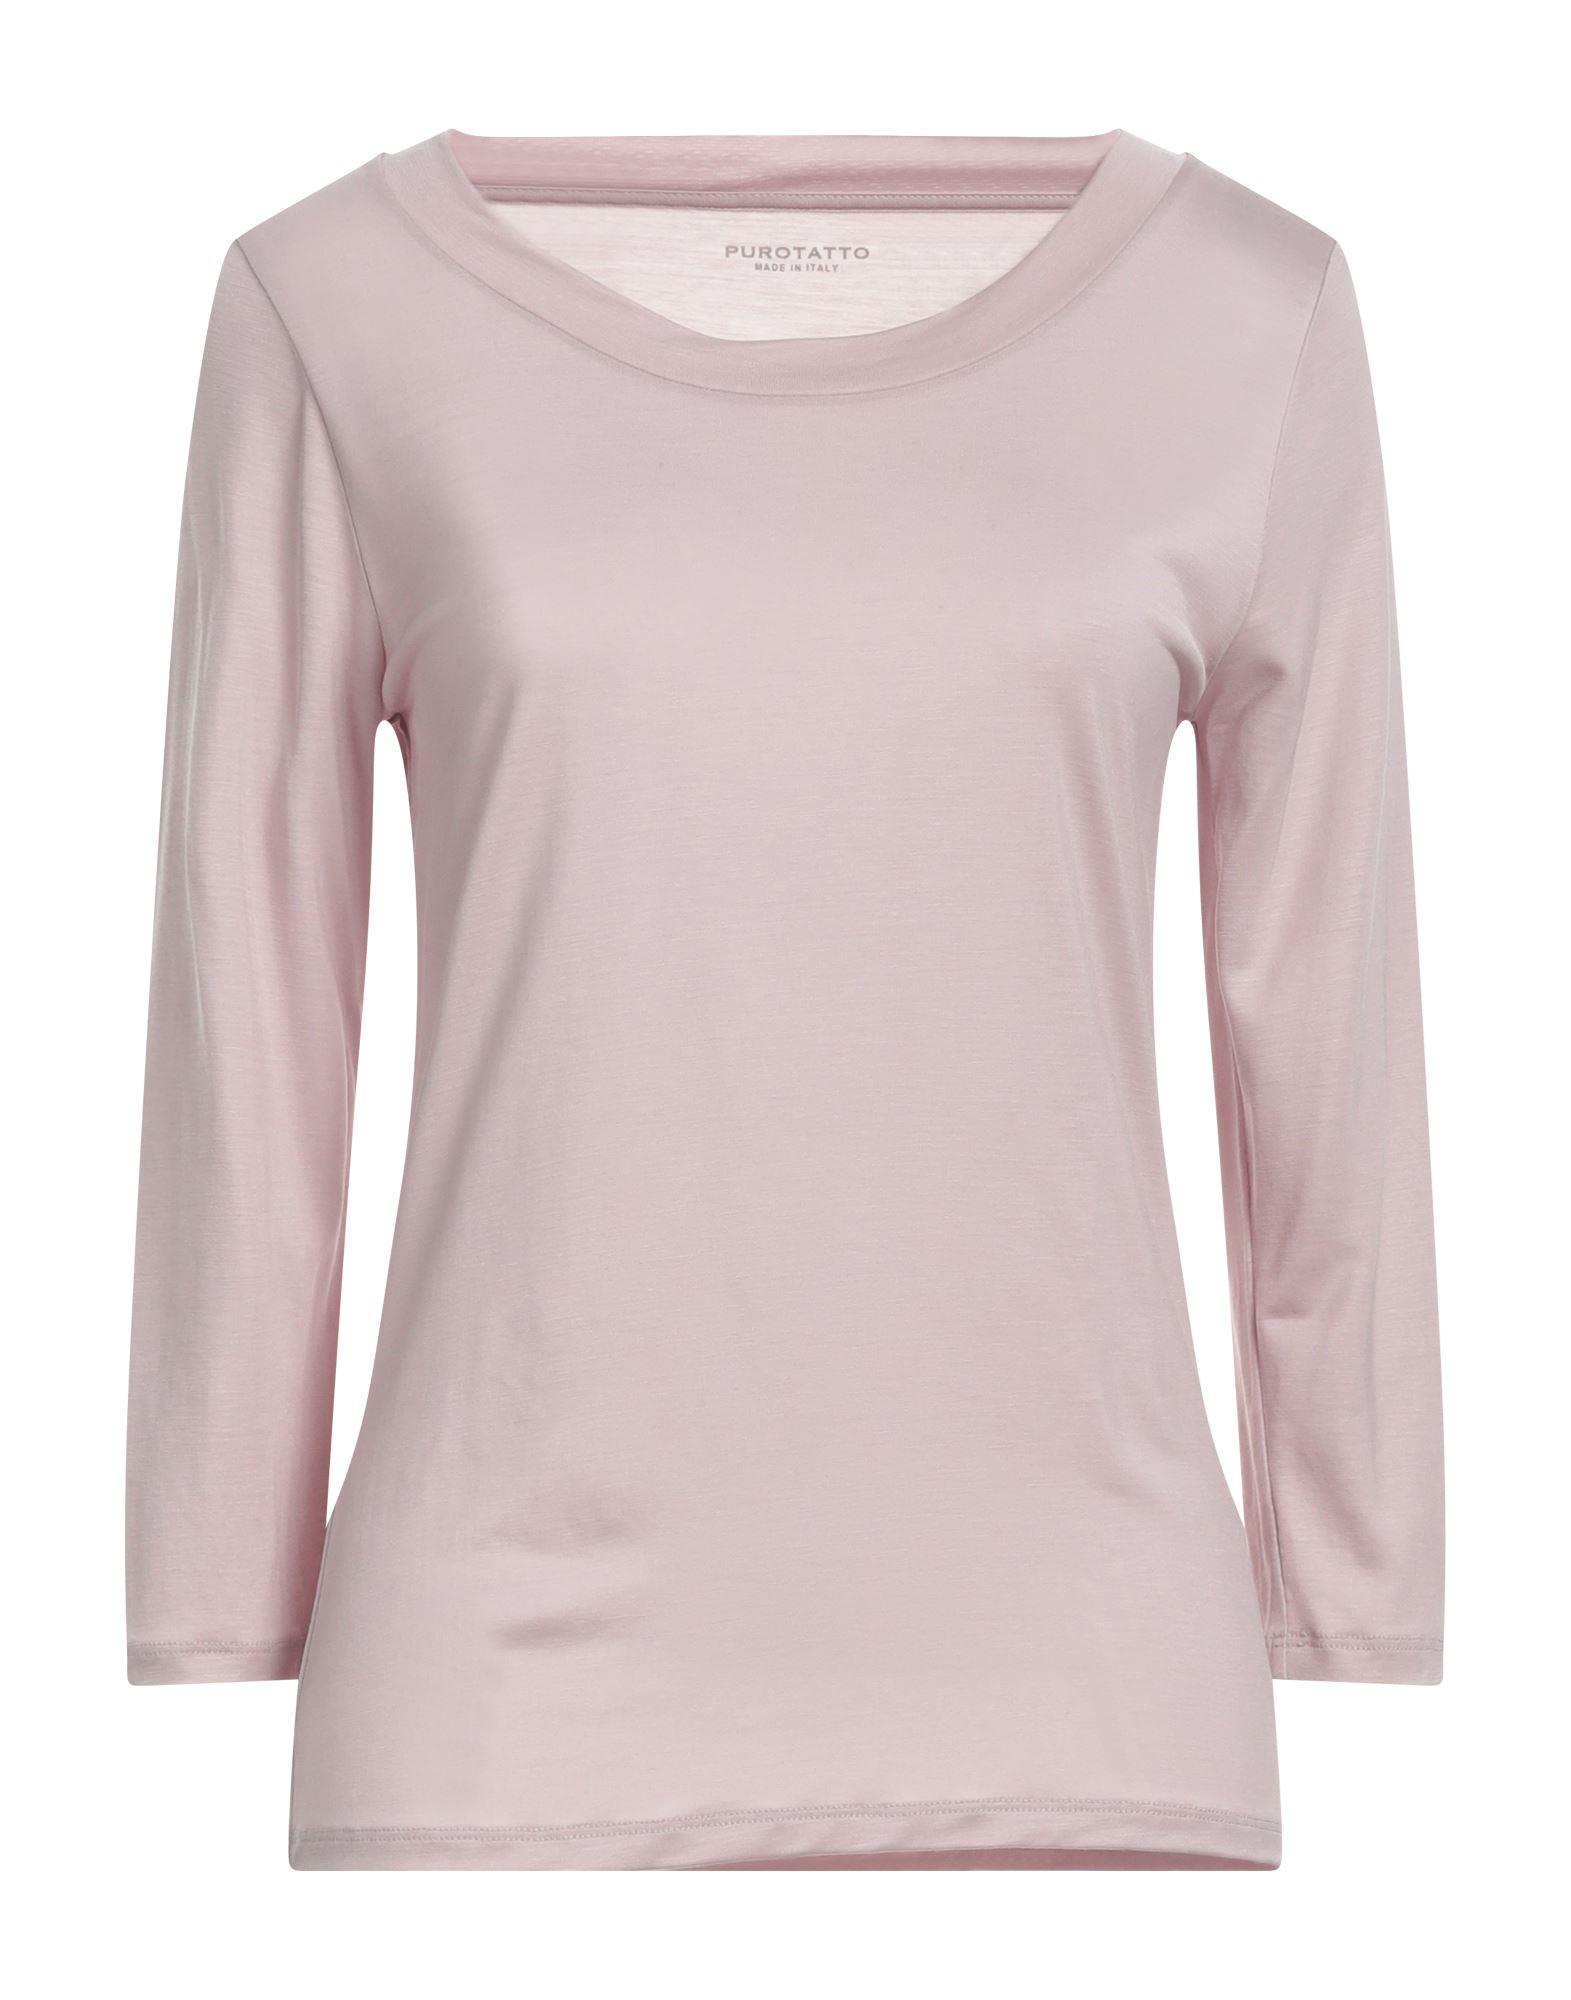 Purotatto T-shirt in Pink | Lyst